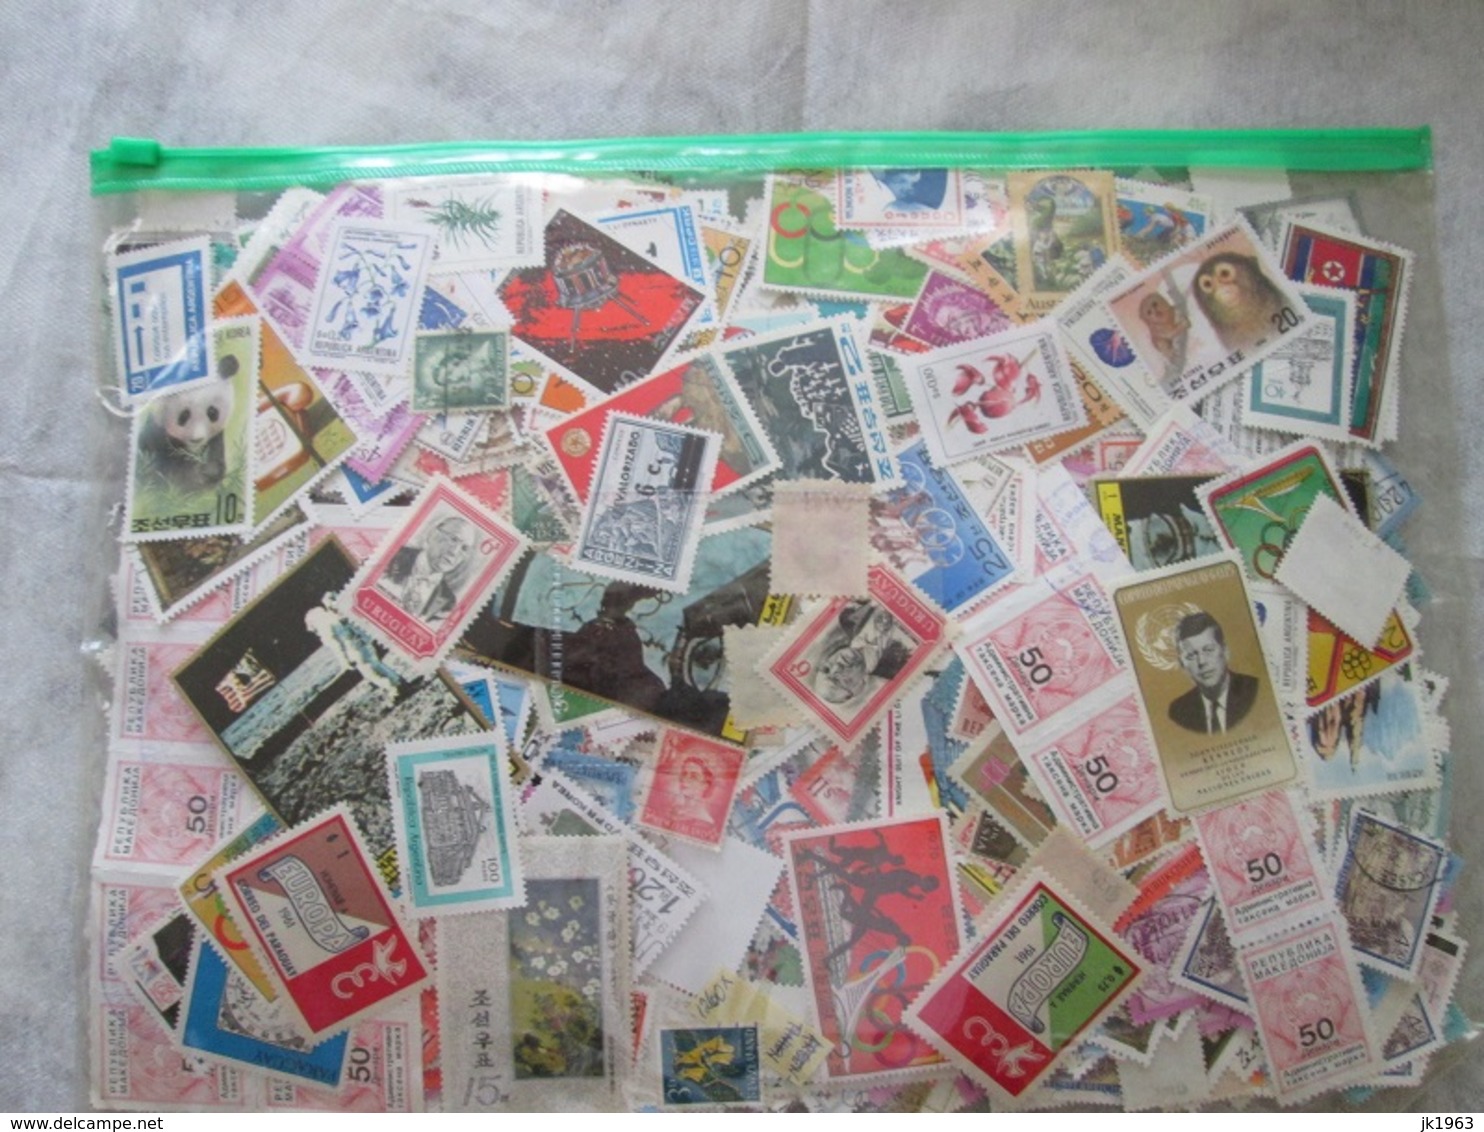 BIG LOT, 250+ COVERS, POSTCARDS AND OTHER; 3-3500+WORLDWIDE STAMPS, AND OTHER, SEE 57 PHOTOS - Lots & Kiloware (mixtures) - Min. 1000 Stamps